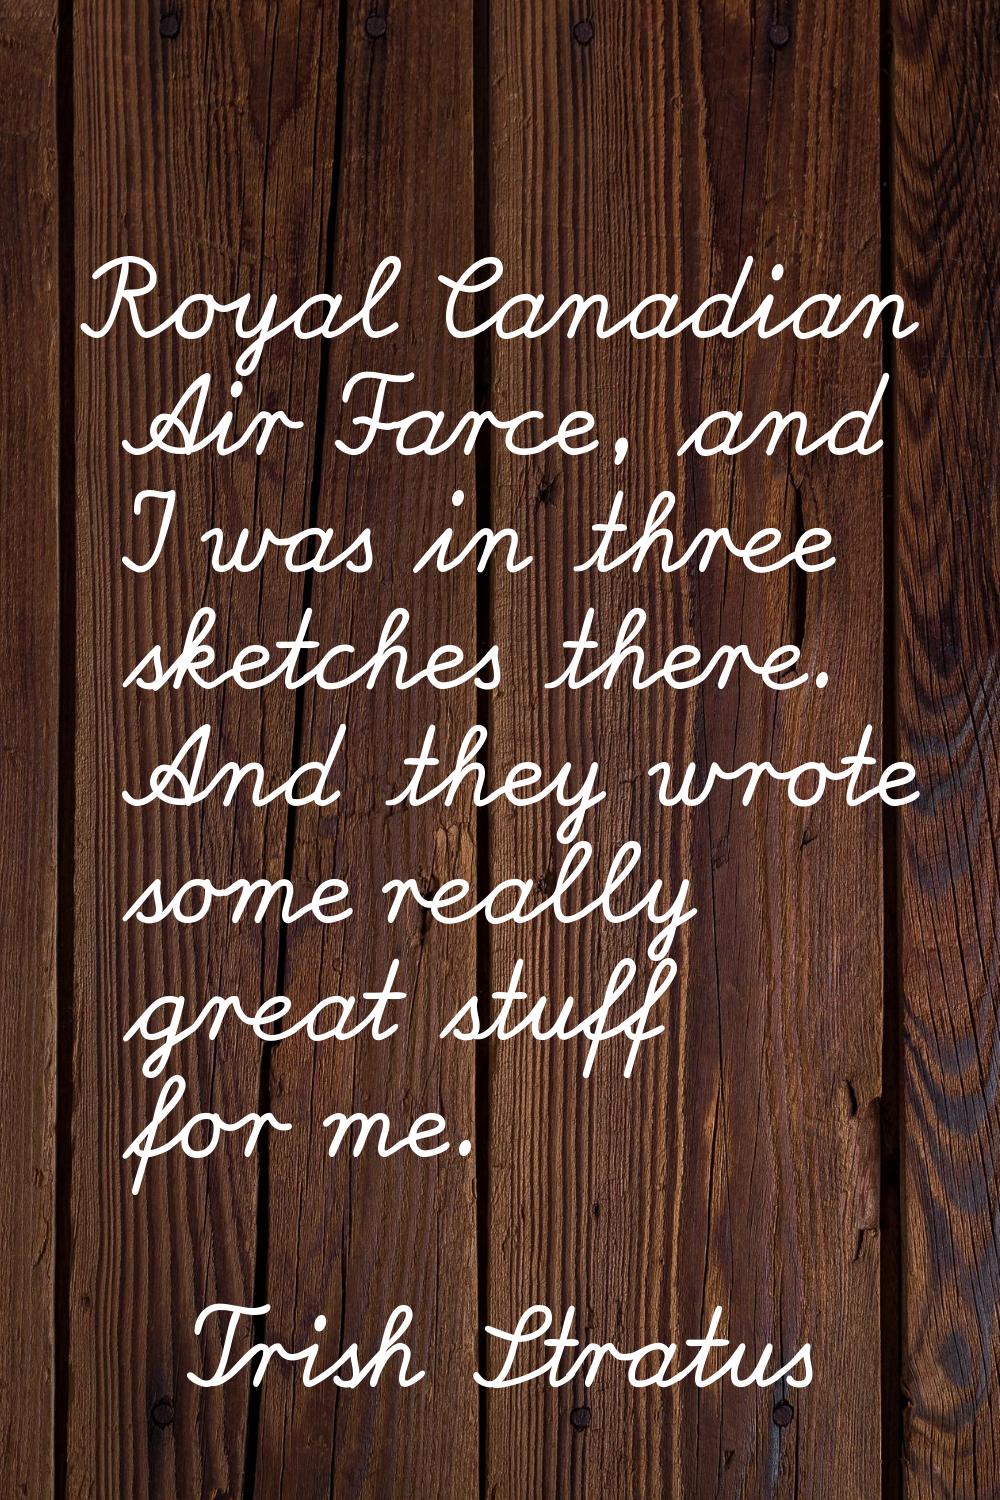 Royal Canadian Air Farce, and I was in three sketches there. And they wrote some really great stuff